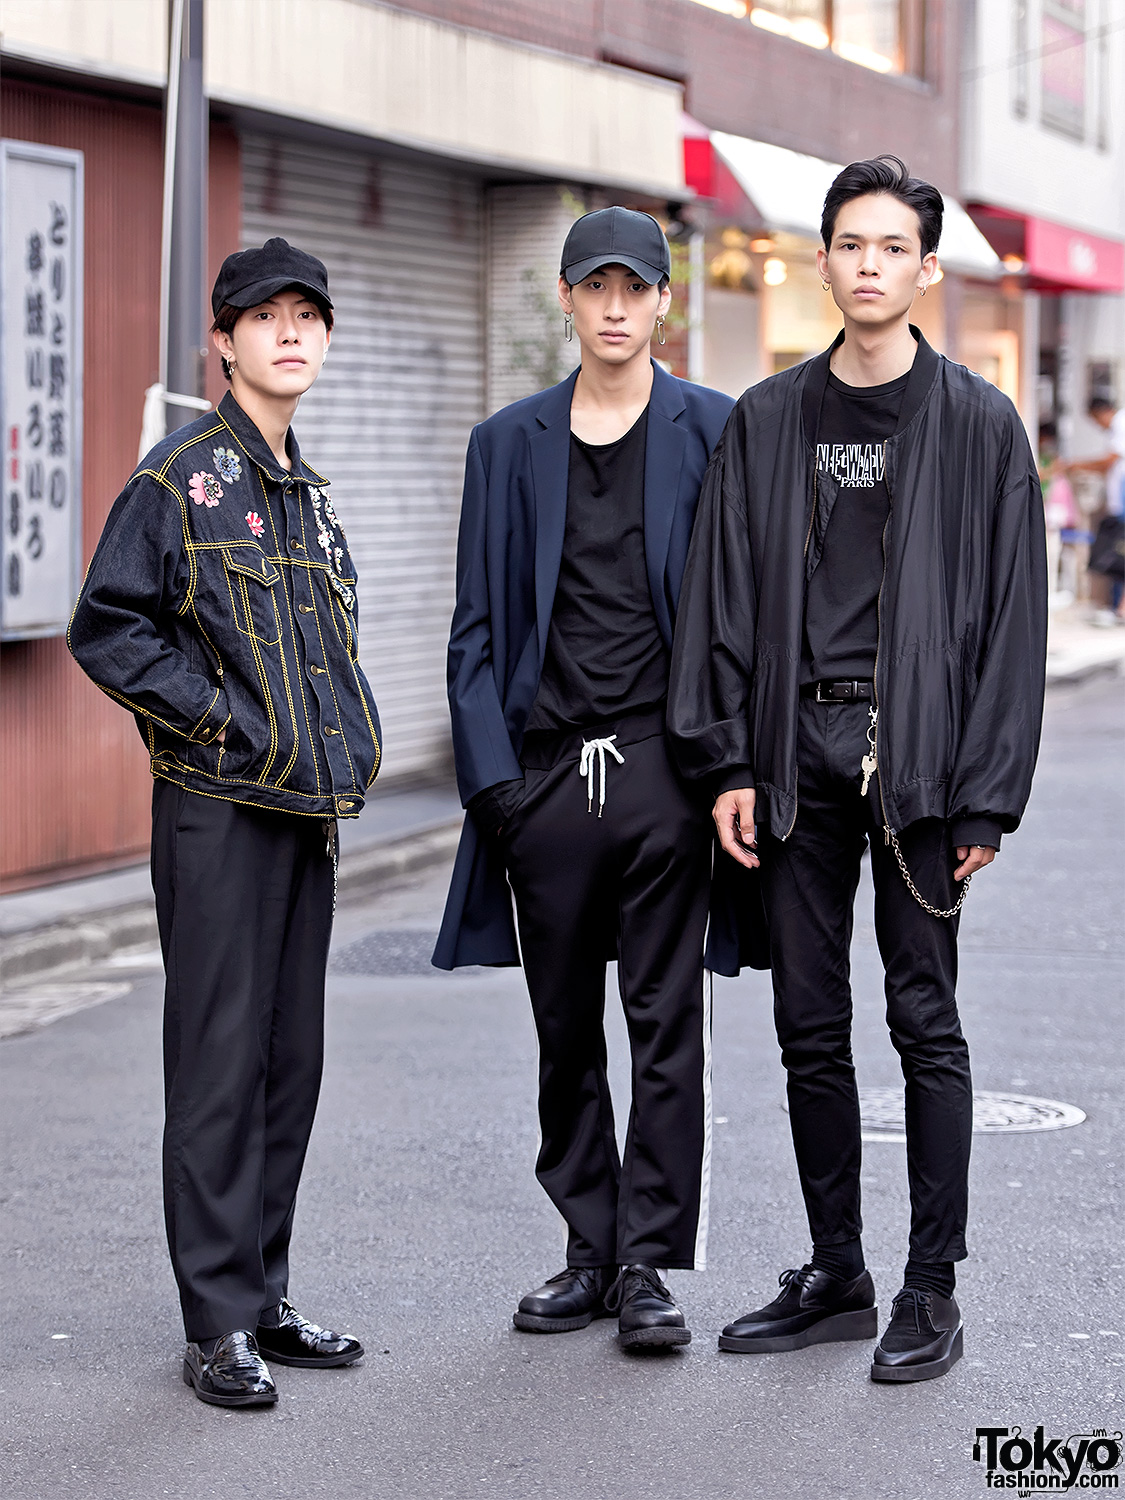 Harajuku Male Models Wearing Lad Musician, Dior Homme, and Vintage Fashion